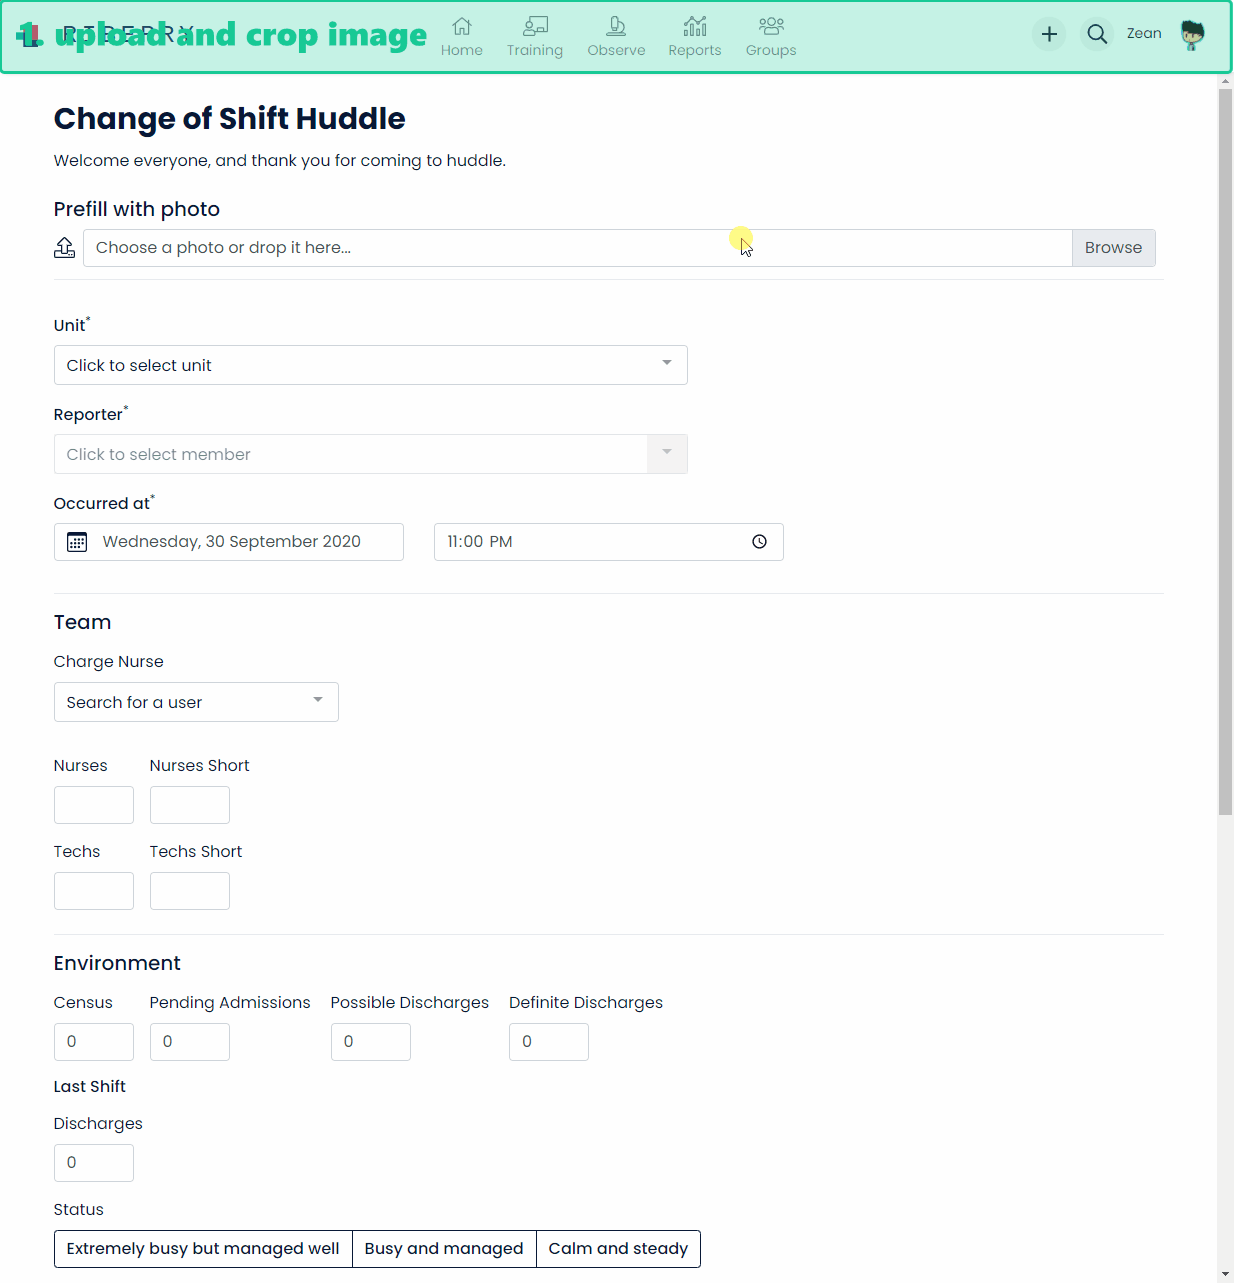 Extracting data from a Change of Shift Huddle form